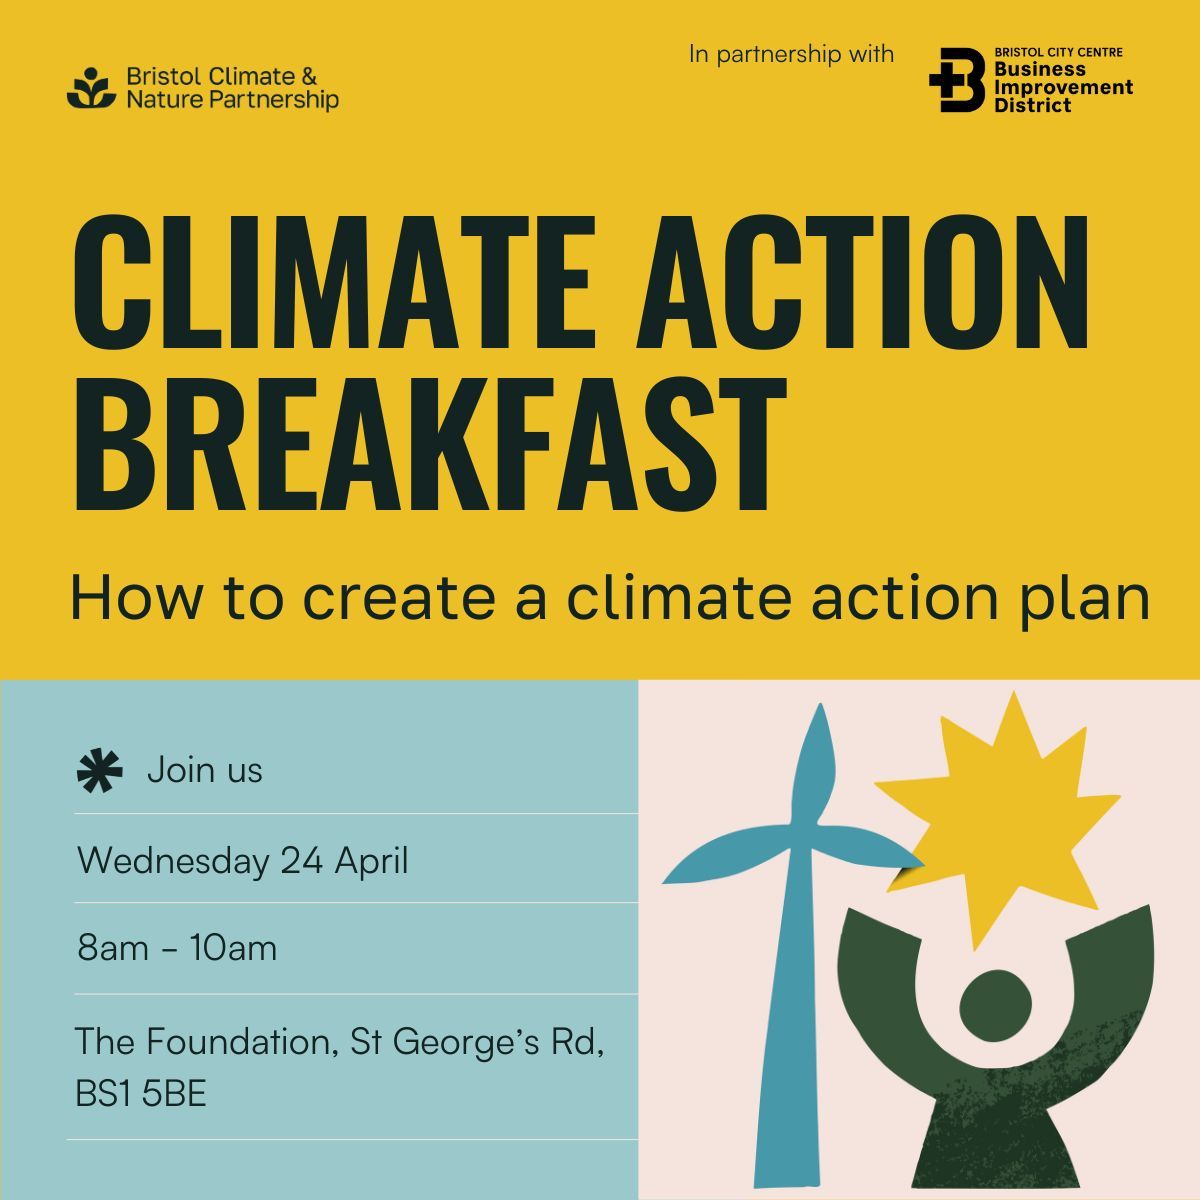 1 week to go until our Climate Action Breakfast with Charlie Leaman (@Eunomia_RandC), exploring how organisations can create/update their climate action plan. If you want to deliver robust and effective change, book your free ticket: buff.ly/4aOZzk6